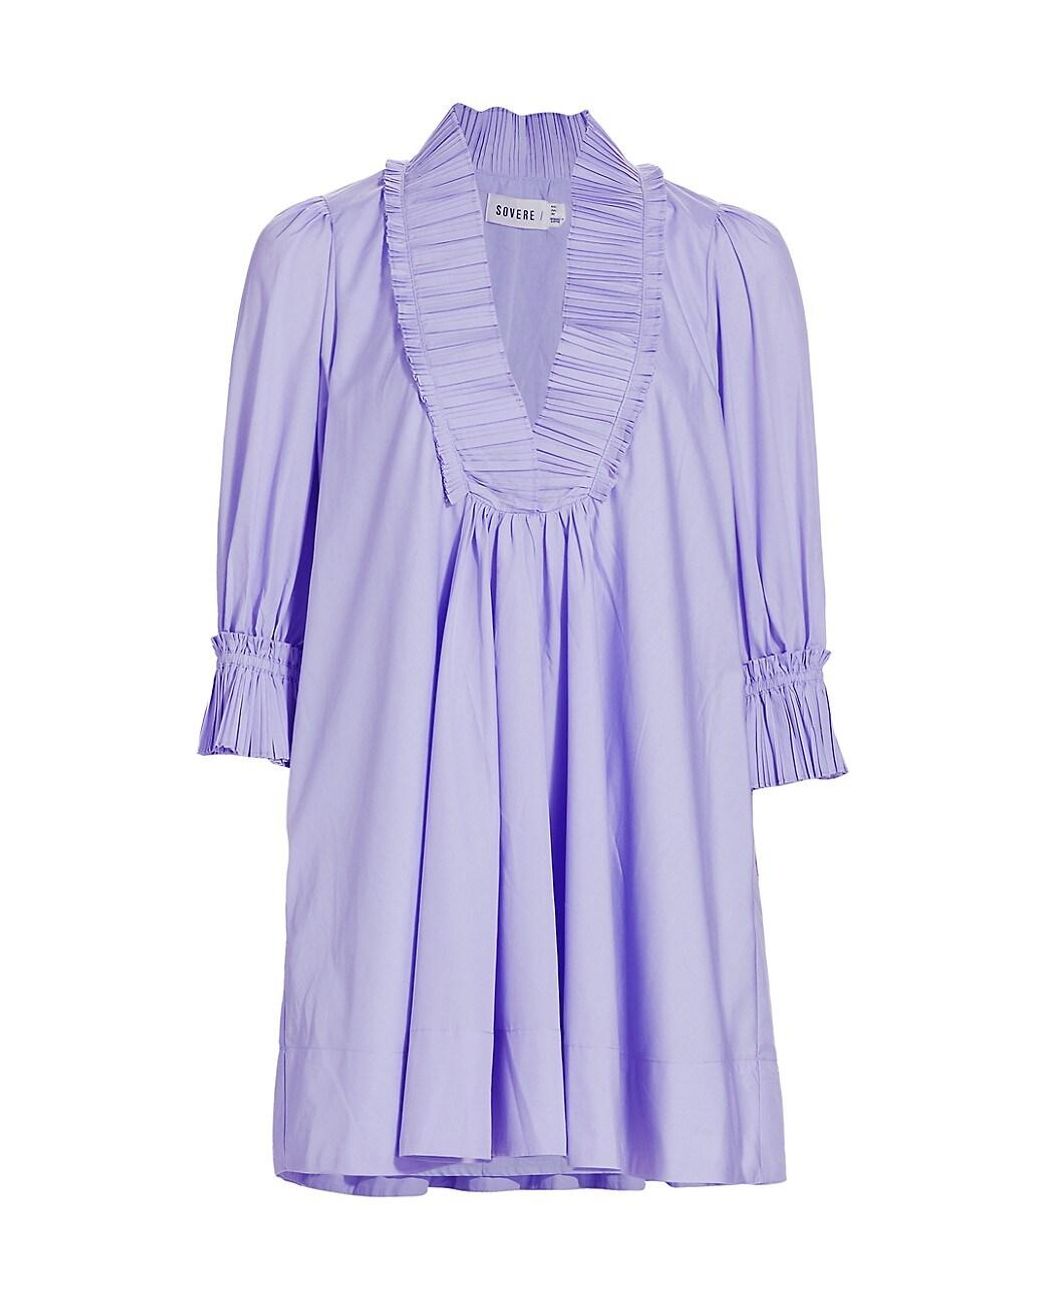 SOVERE Synthetic Rapture Shift Minidress in Purple | Lyst